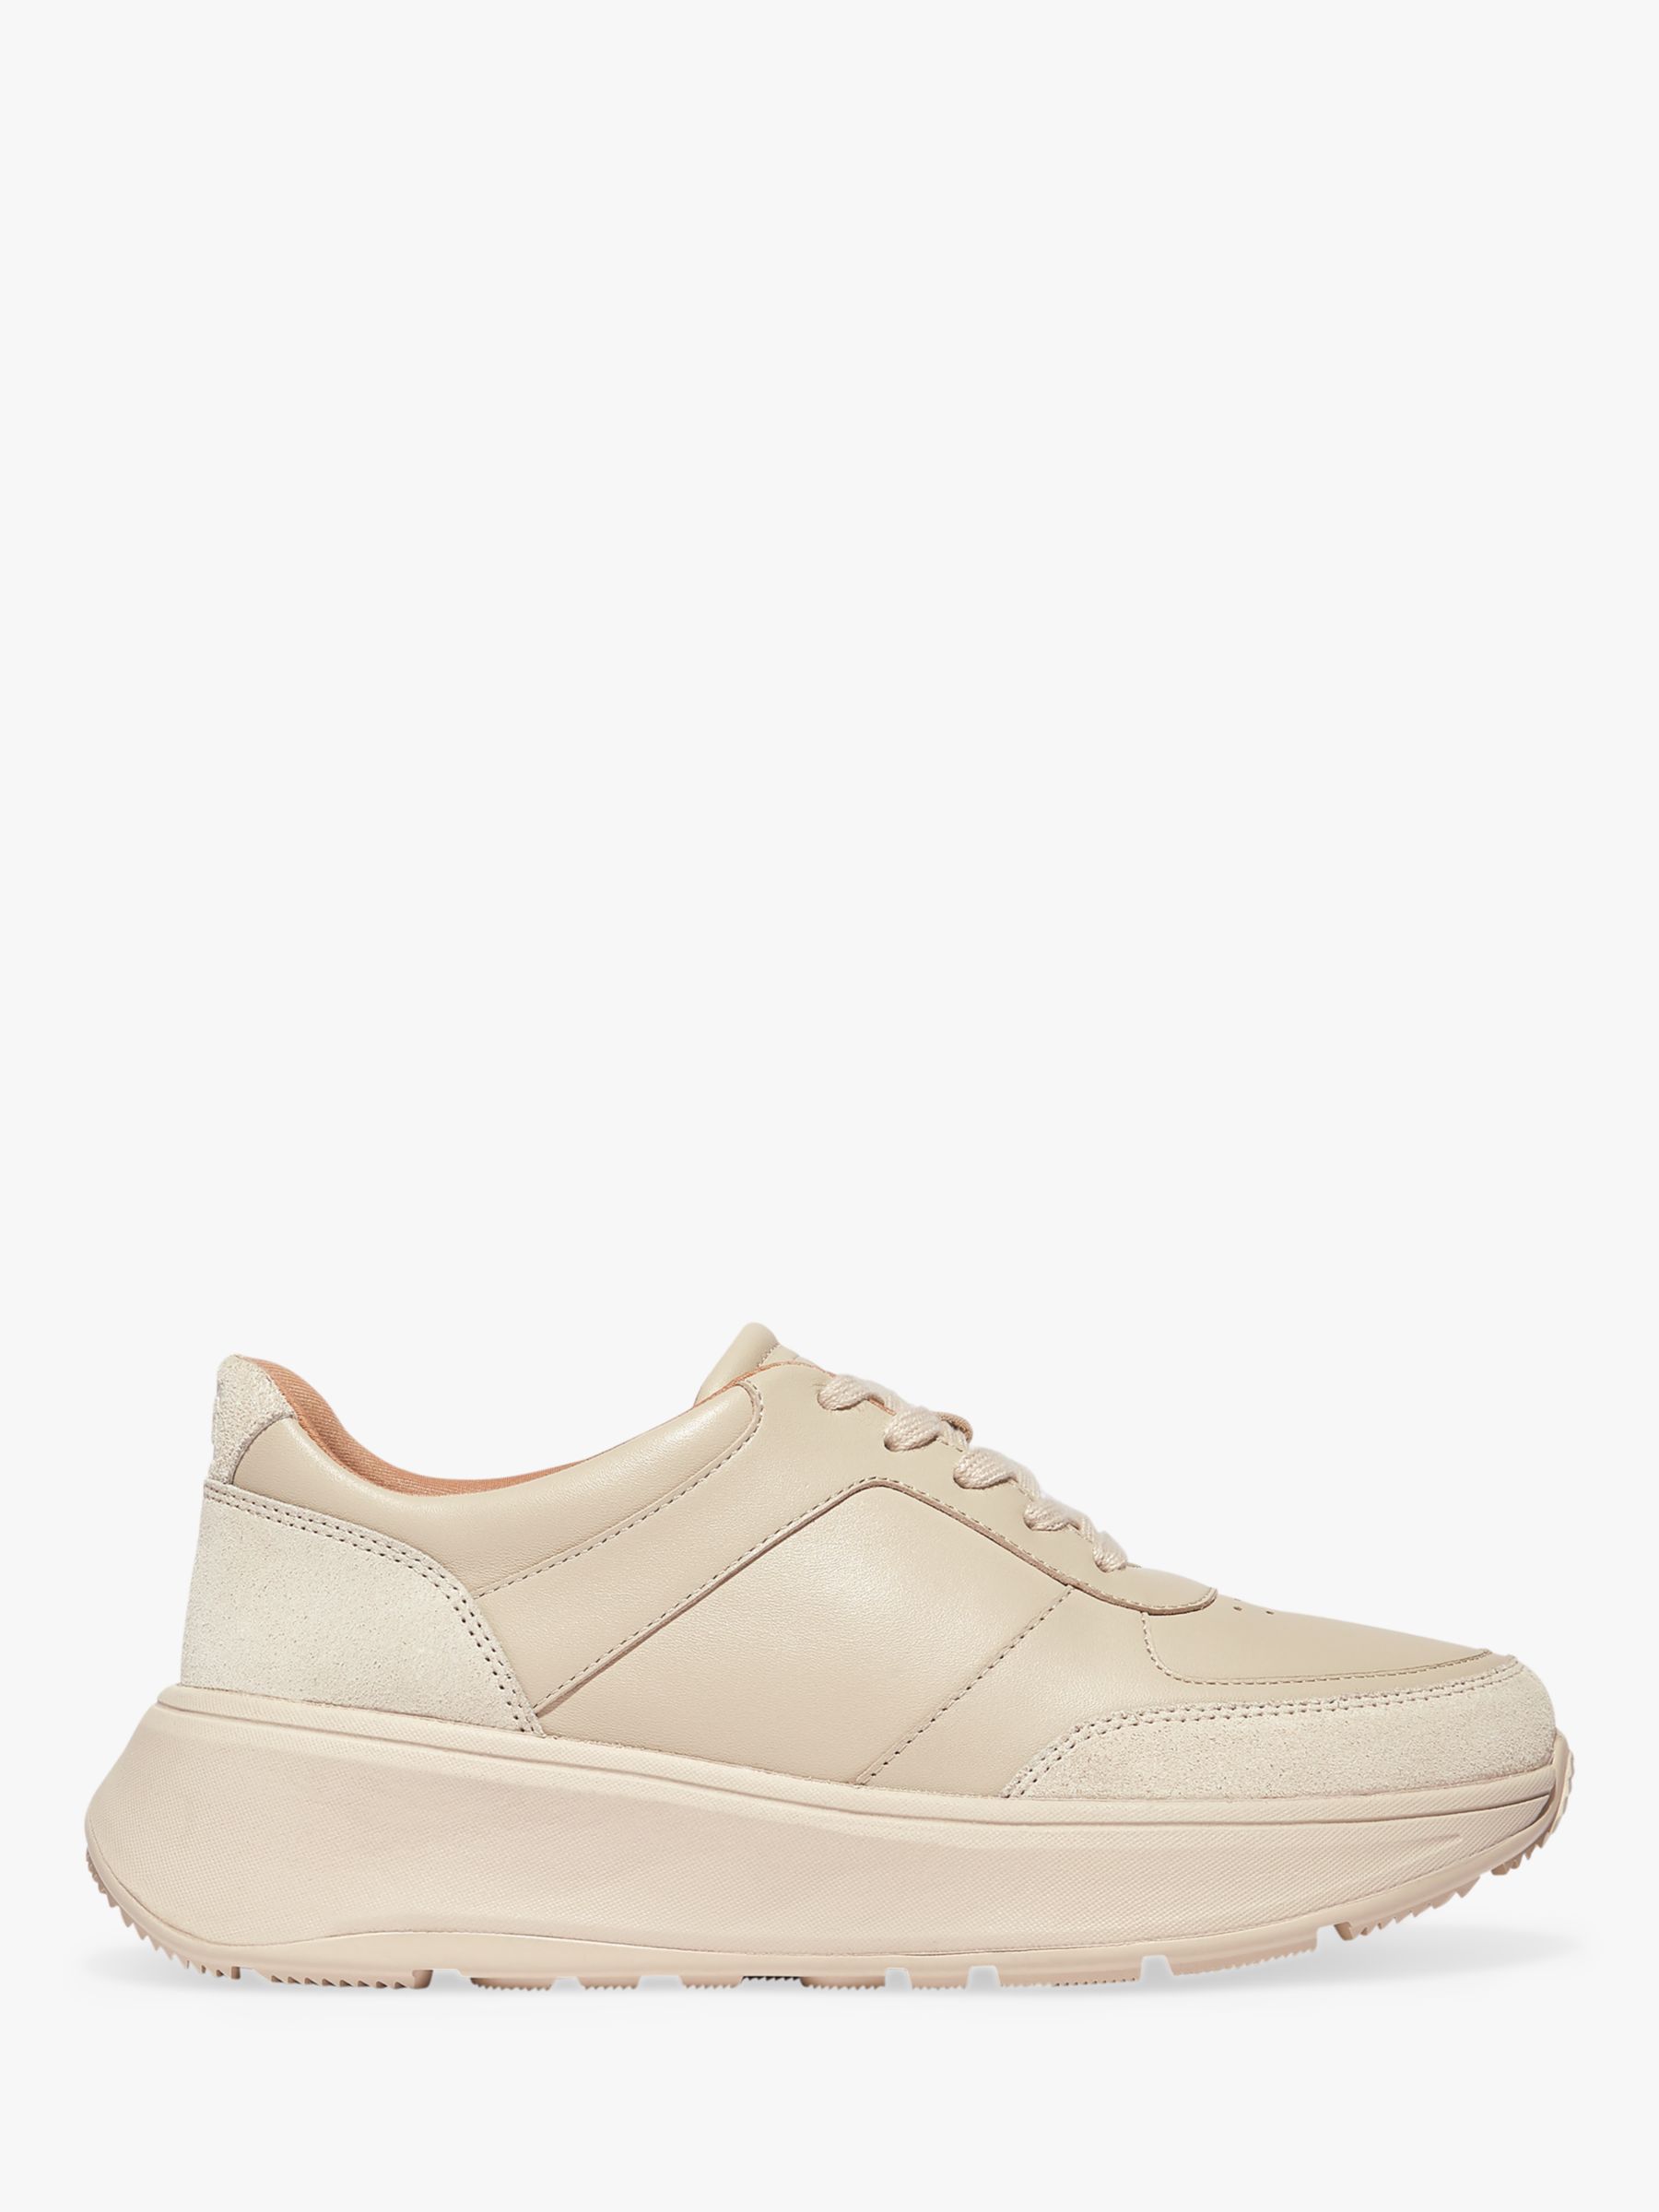 FitFlop Fmode Leather Chunky Trainers, Stone Beige at John Lewis & Partners